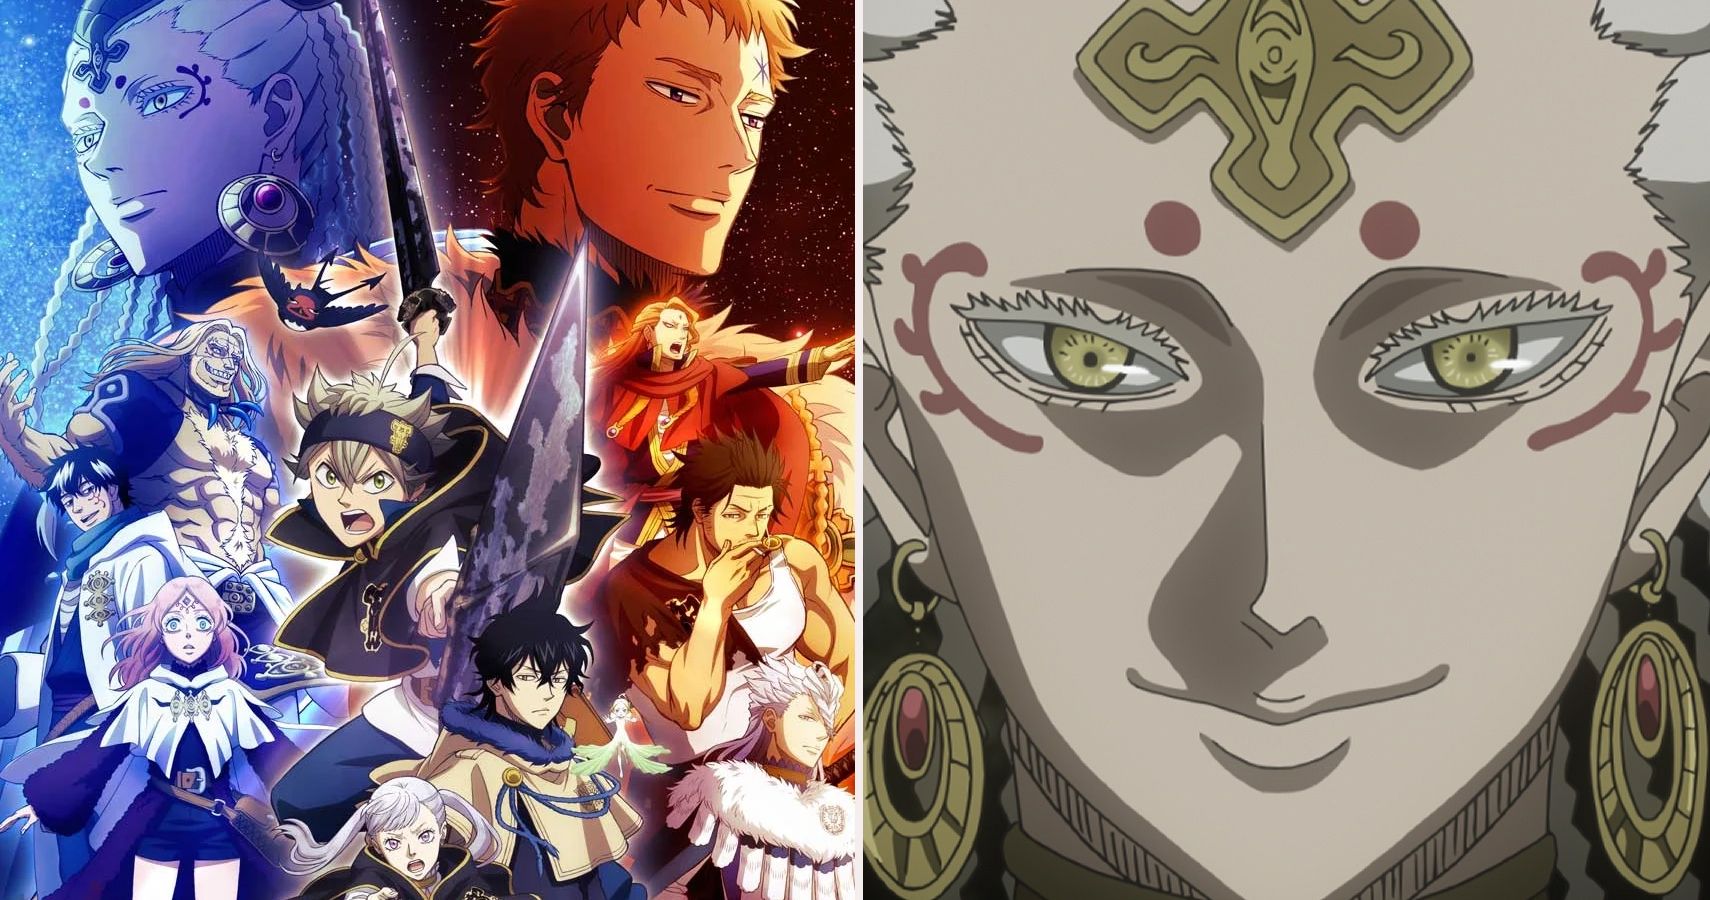 Who Is The Strongest Character In Black Clover?